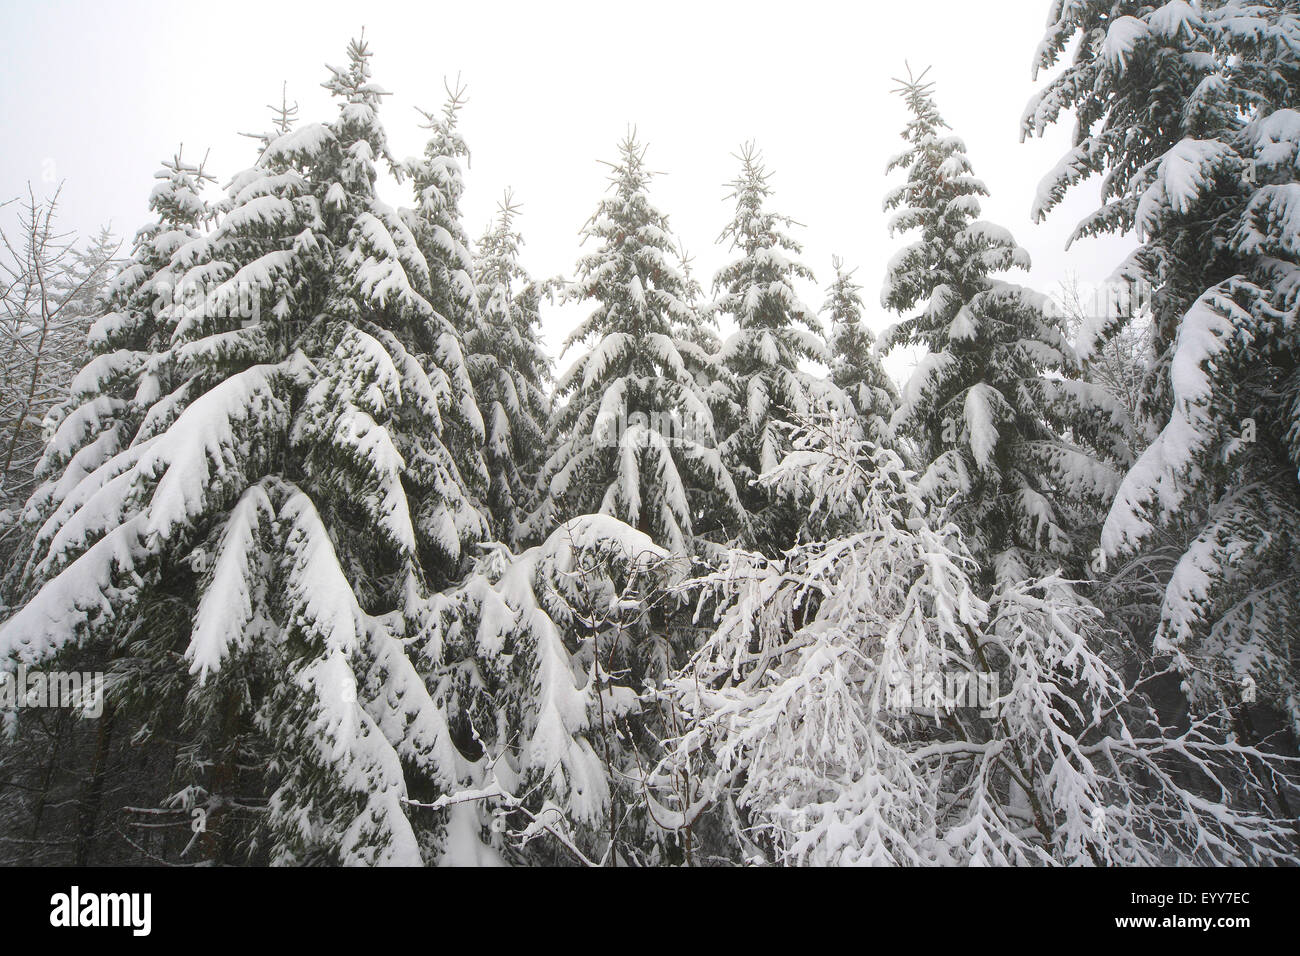 Norway spruce (Picea abies), snow covered pine forest in winter, France, Vercors National Park Stock Photo